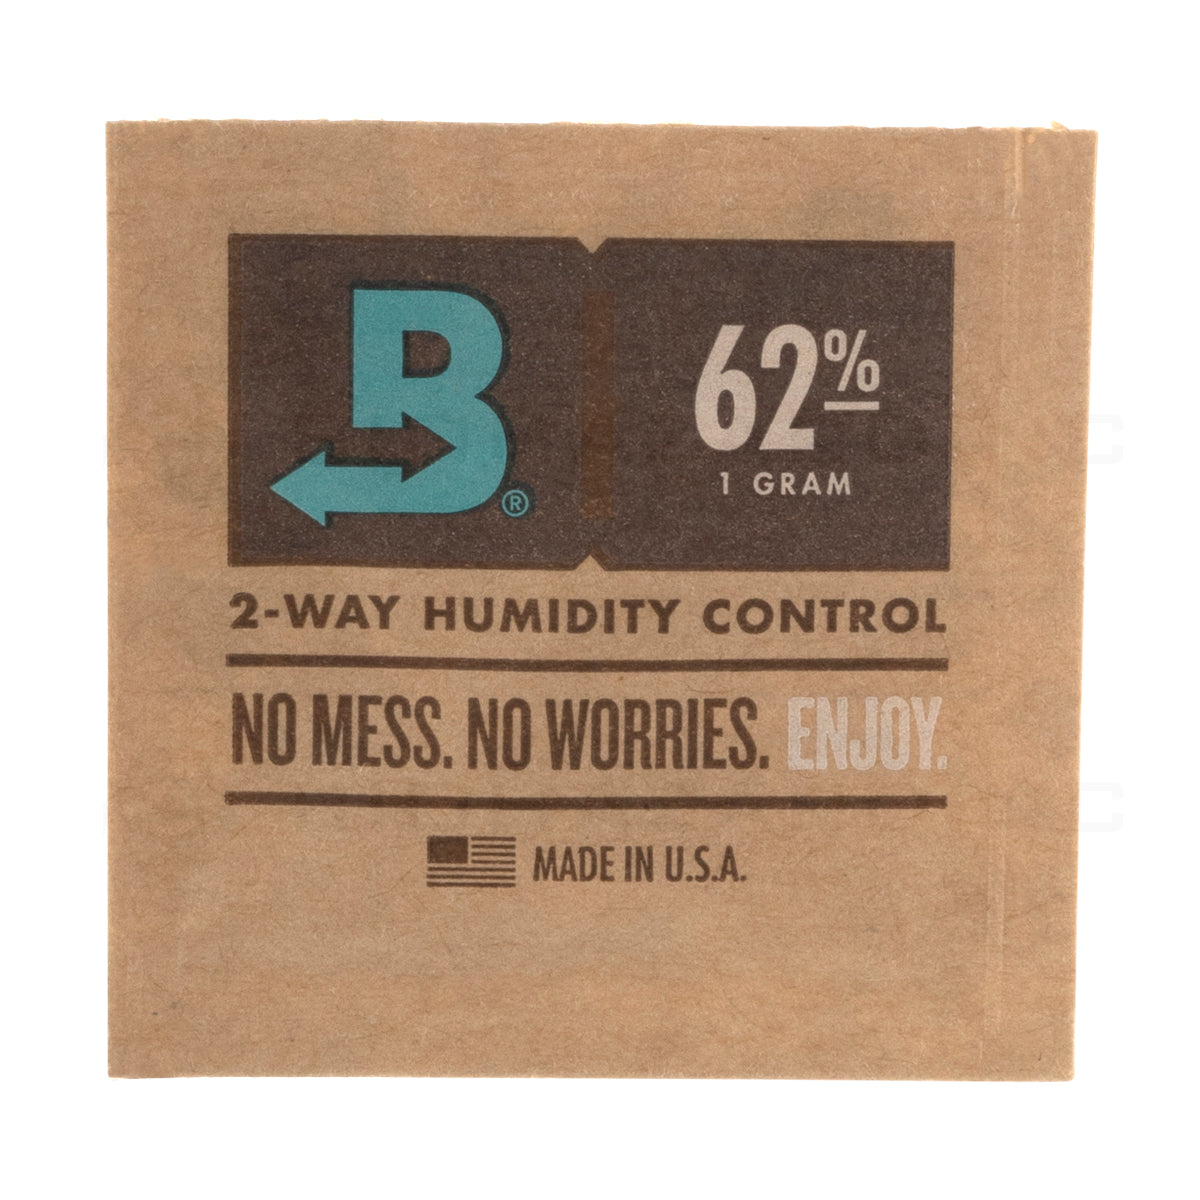 Boveda® | Humidity Control Packs | 1g - 62% - 1500 Count Humidity Pack Boveda   